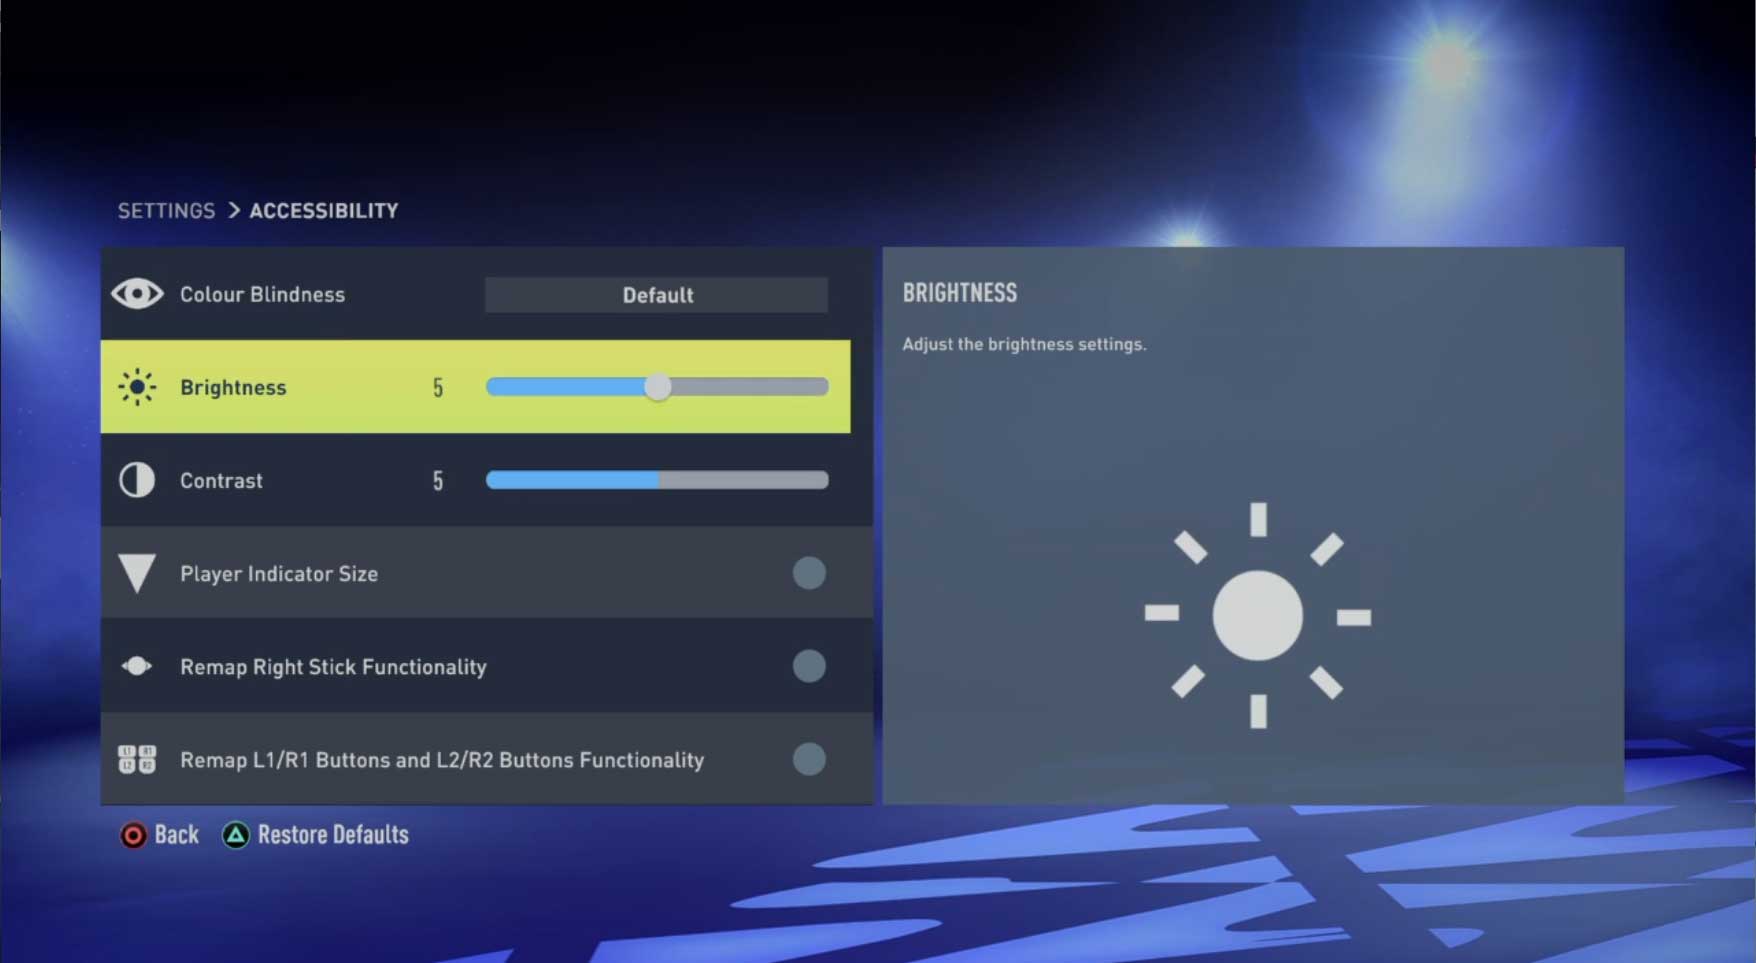 FIFA 22 Accessibility Features and Settings Screen